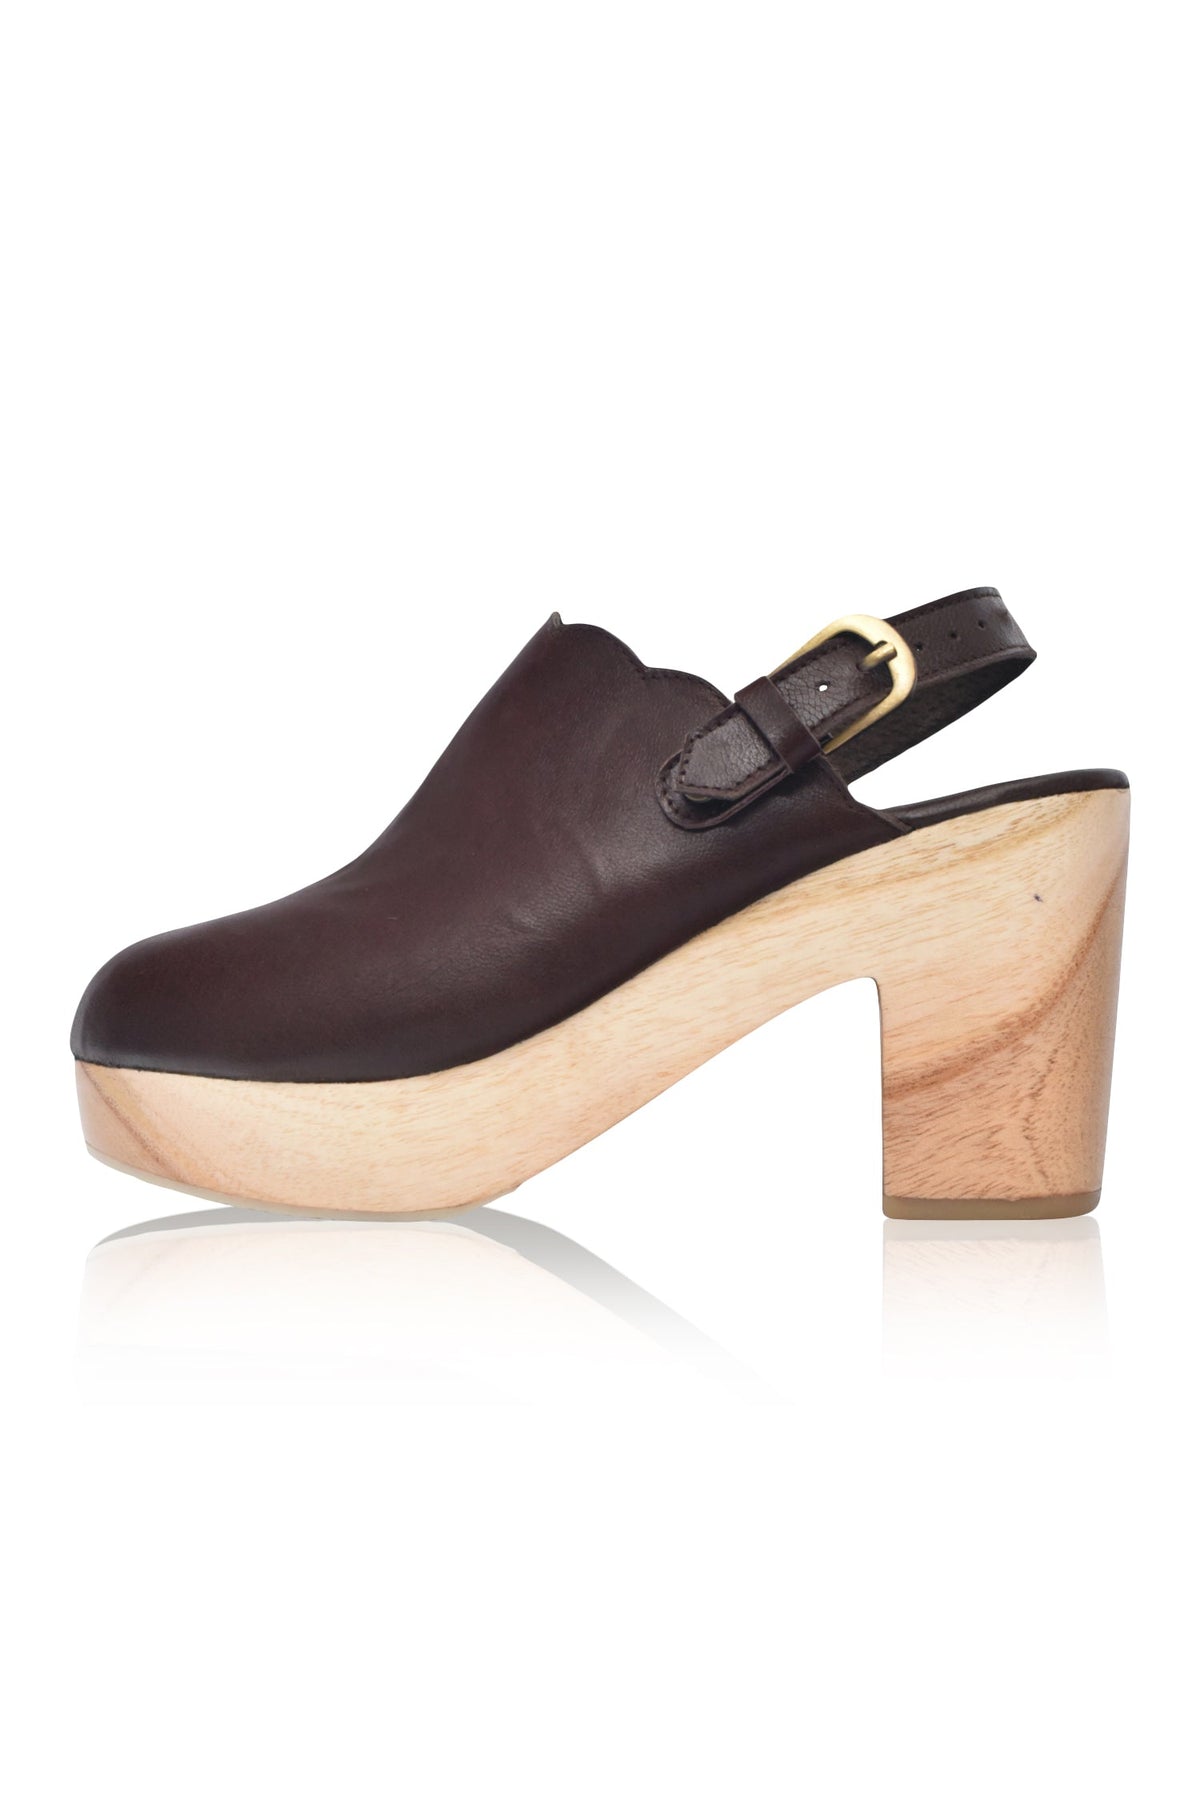 Sierra Convertible Leather Clogs by ELF